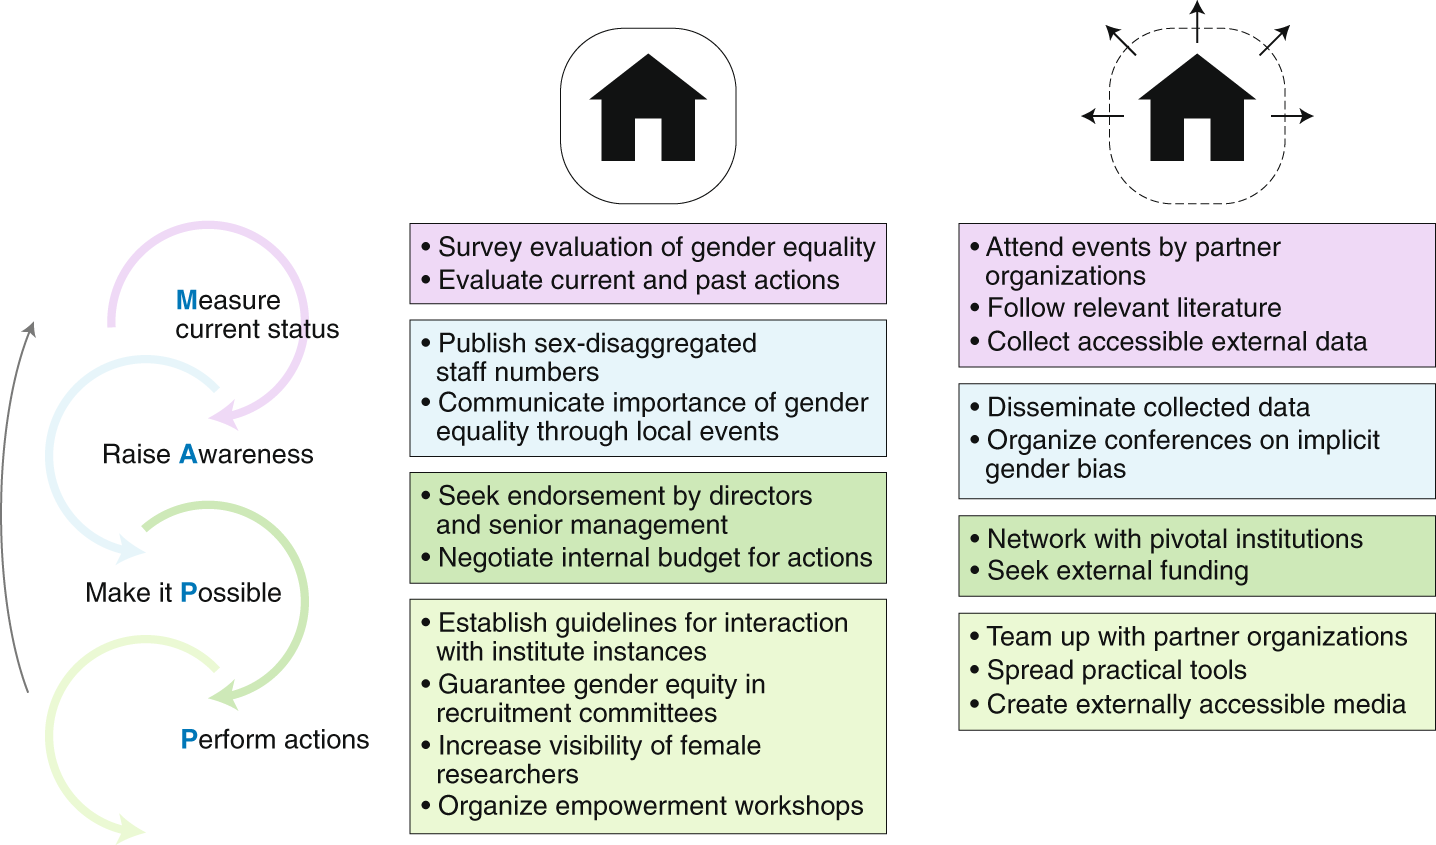 A neuroscientific approach to increase gender equality | Nature Behaviour